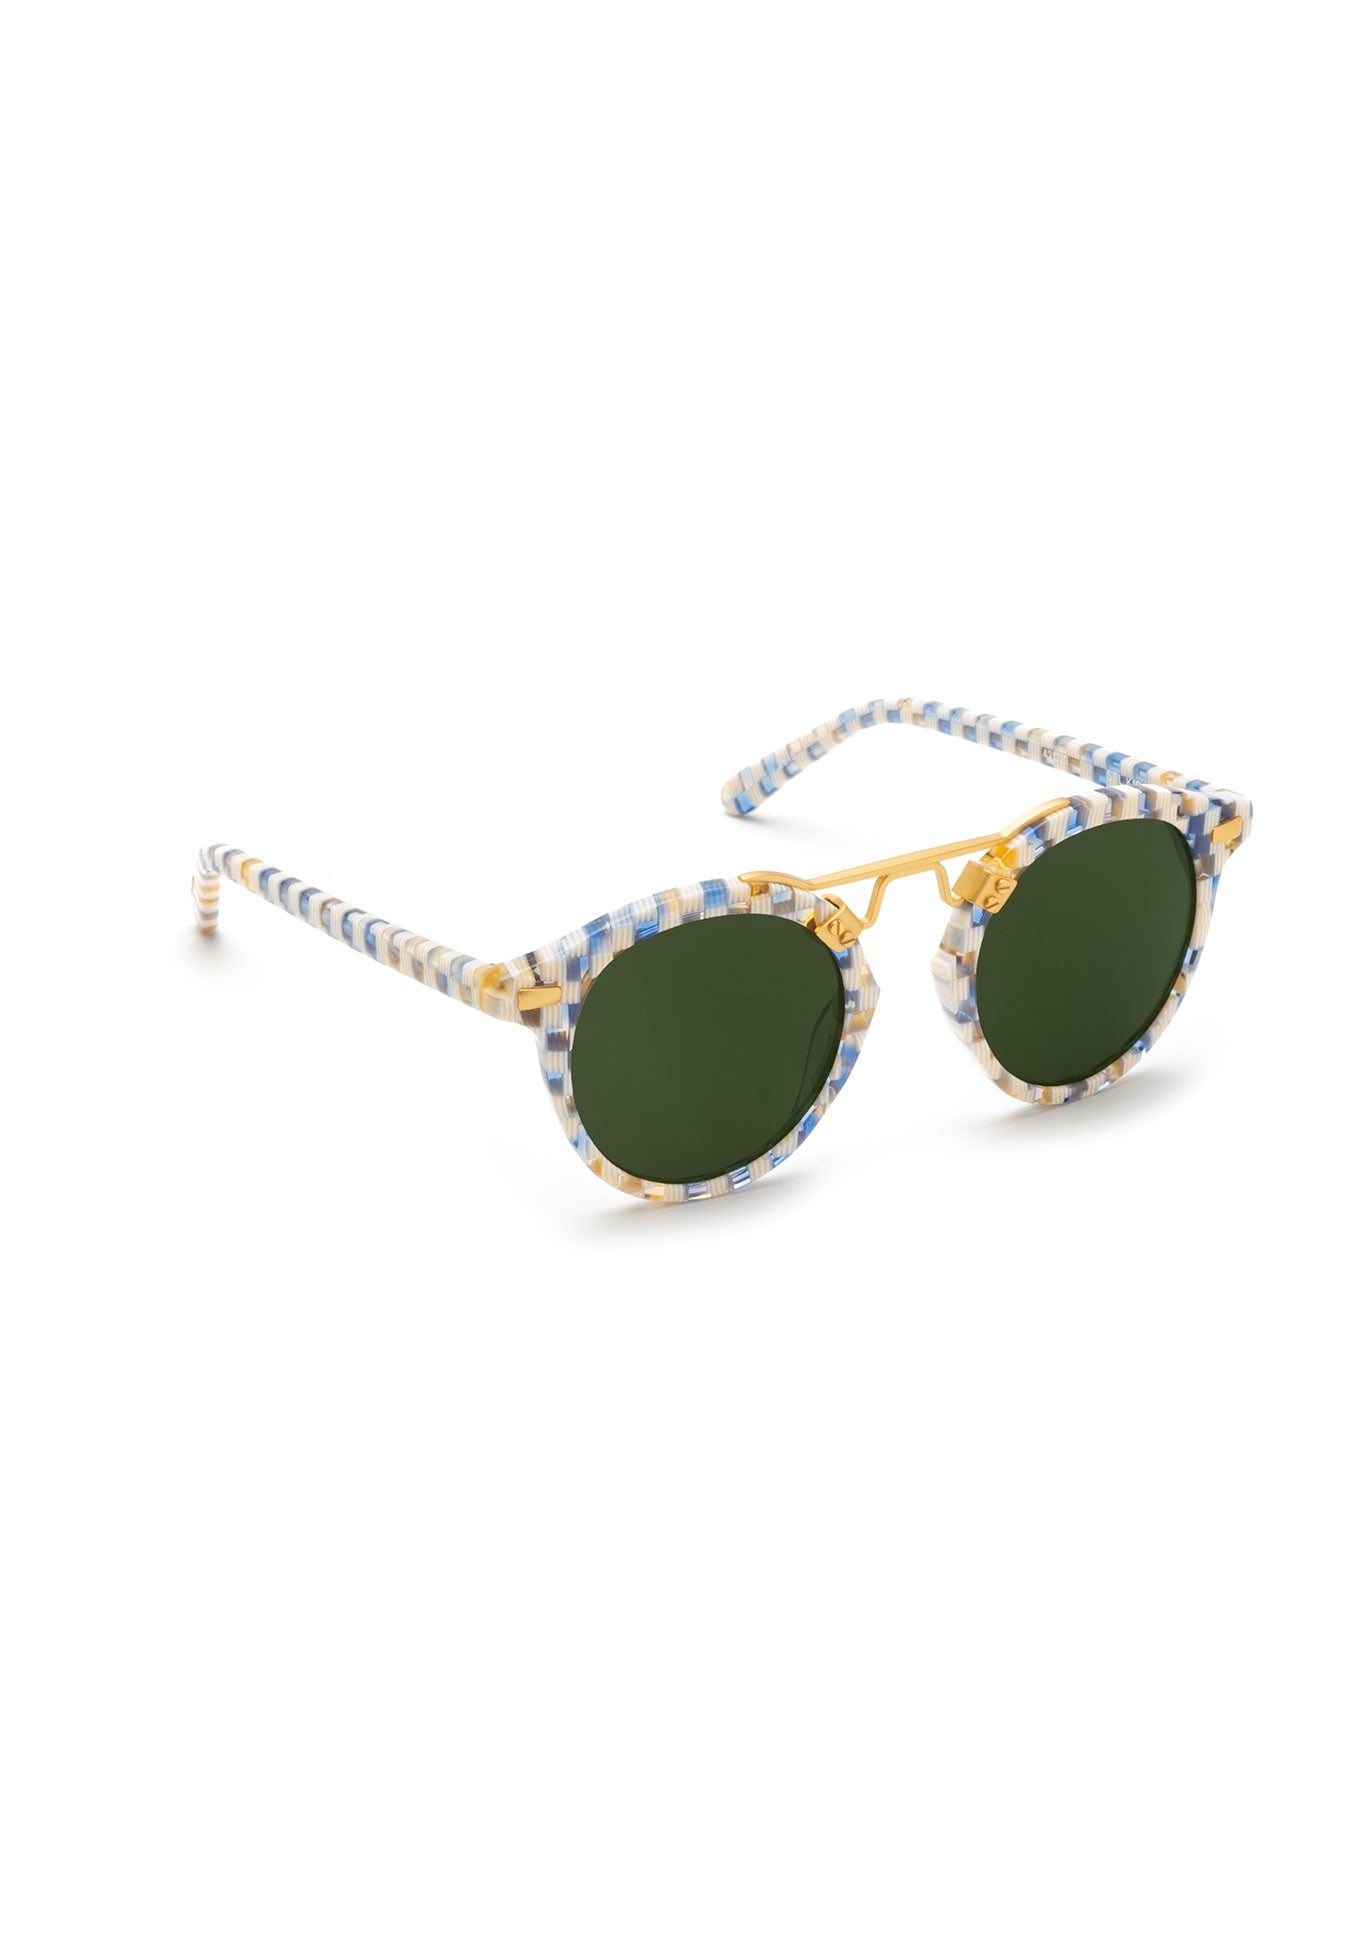 KREWE - ST. LOUIS KIDS | Pincheck 24K Handcrafted, luxury blue and white checkered sunglasses made for children featuring krewe's iconic double metal bridge